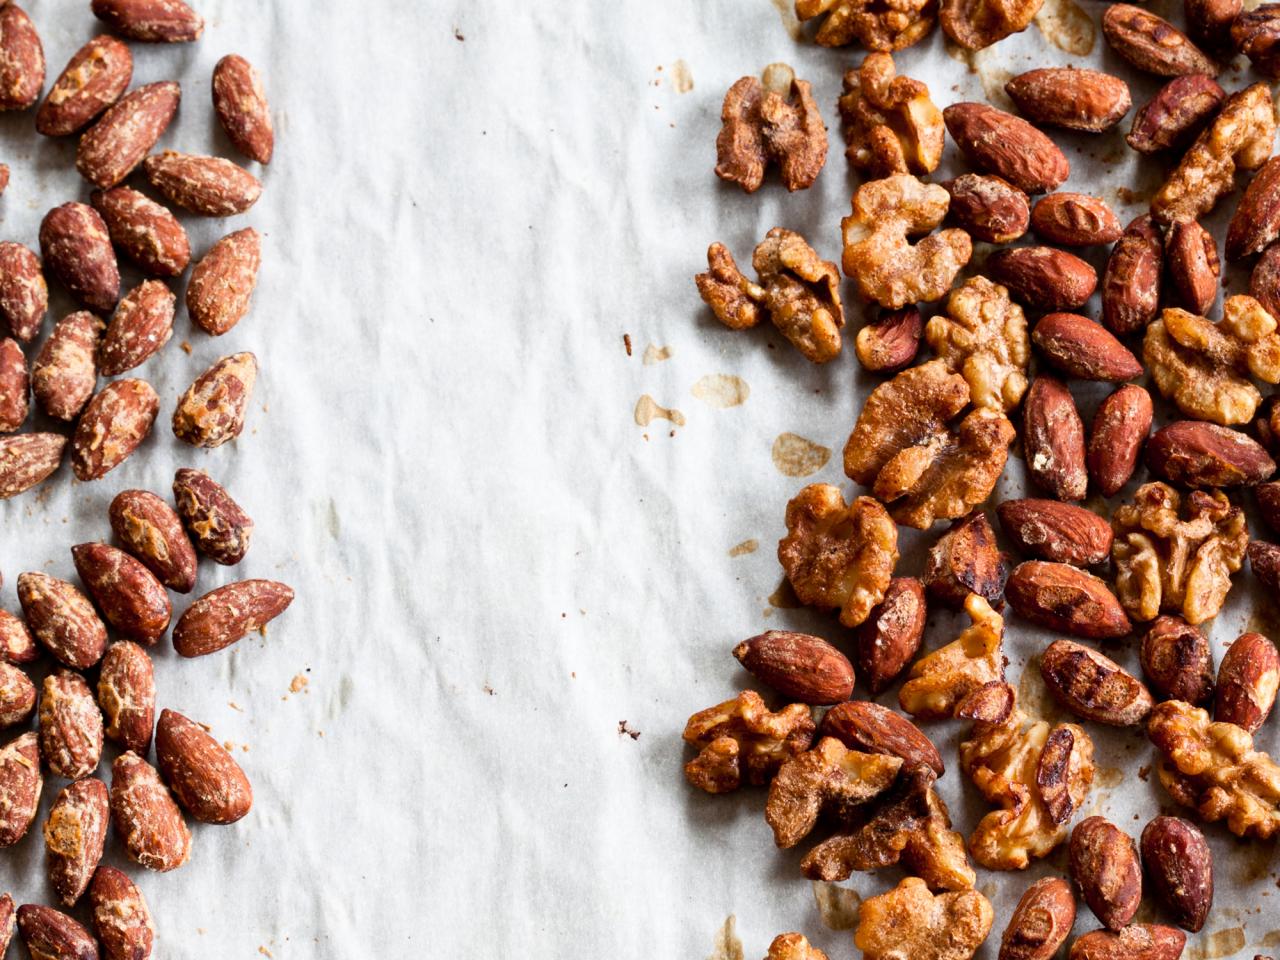 Slow Cooker Spiced Nuts - Home. Made. Interest.